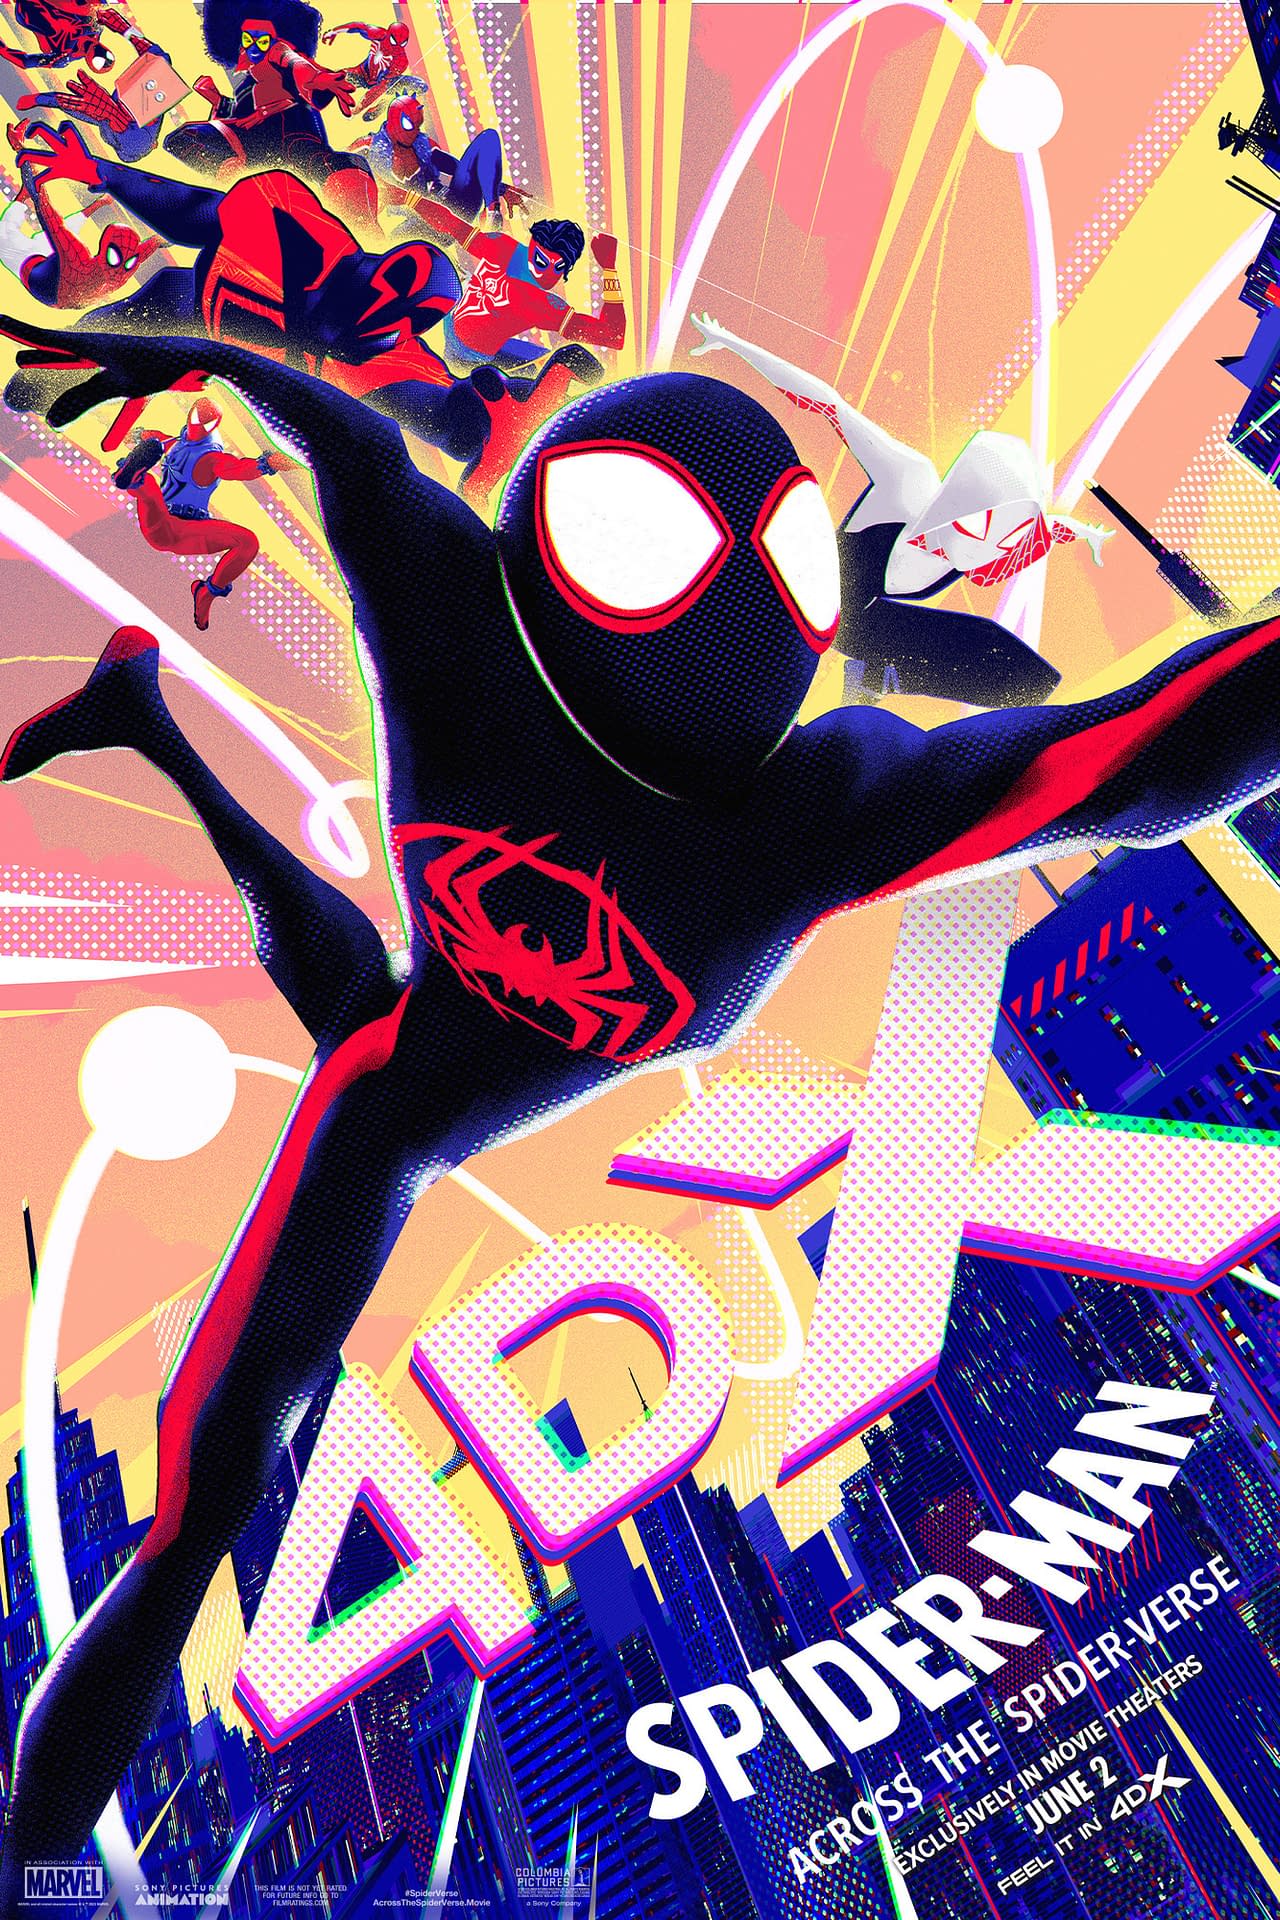 Across The Spider-Verse Extended Poster Puts Insomniac's Spider